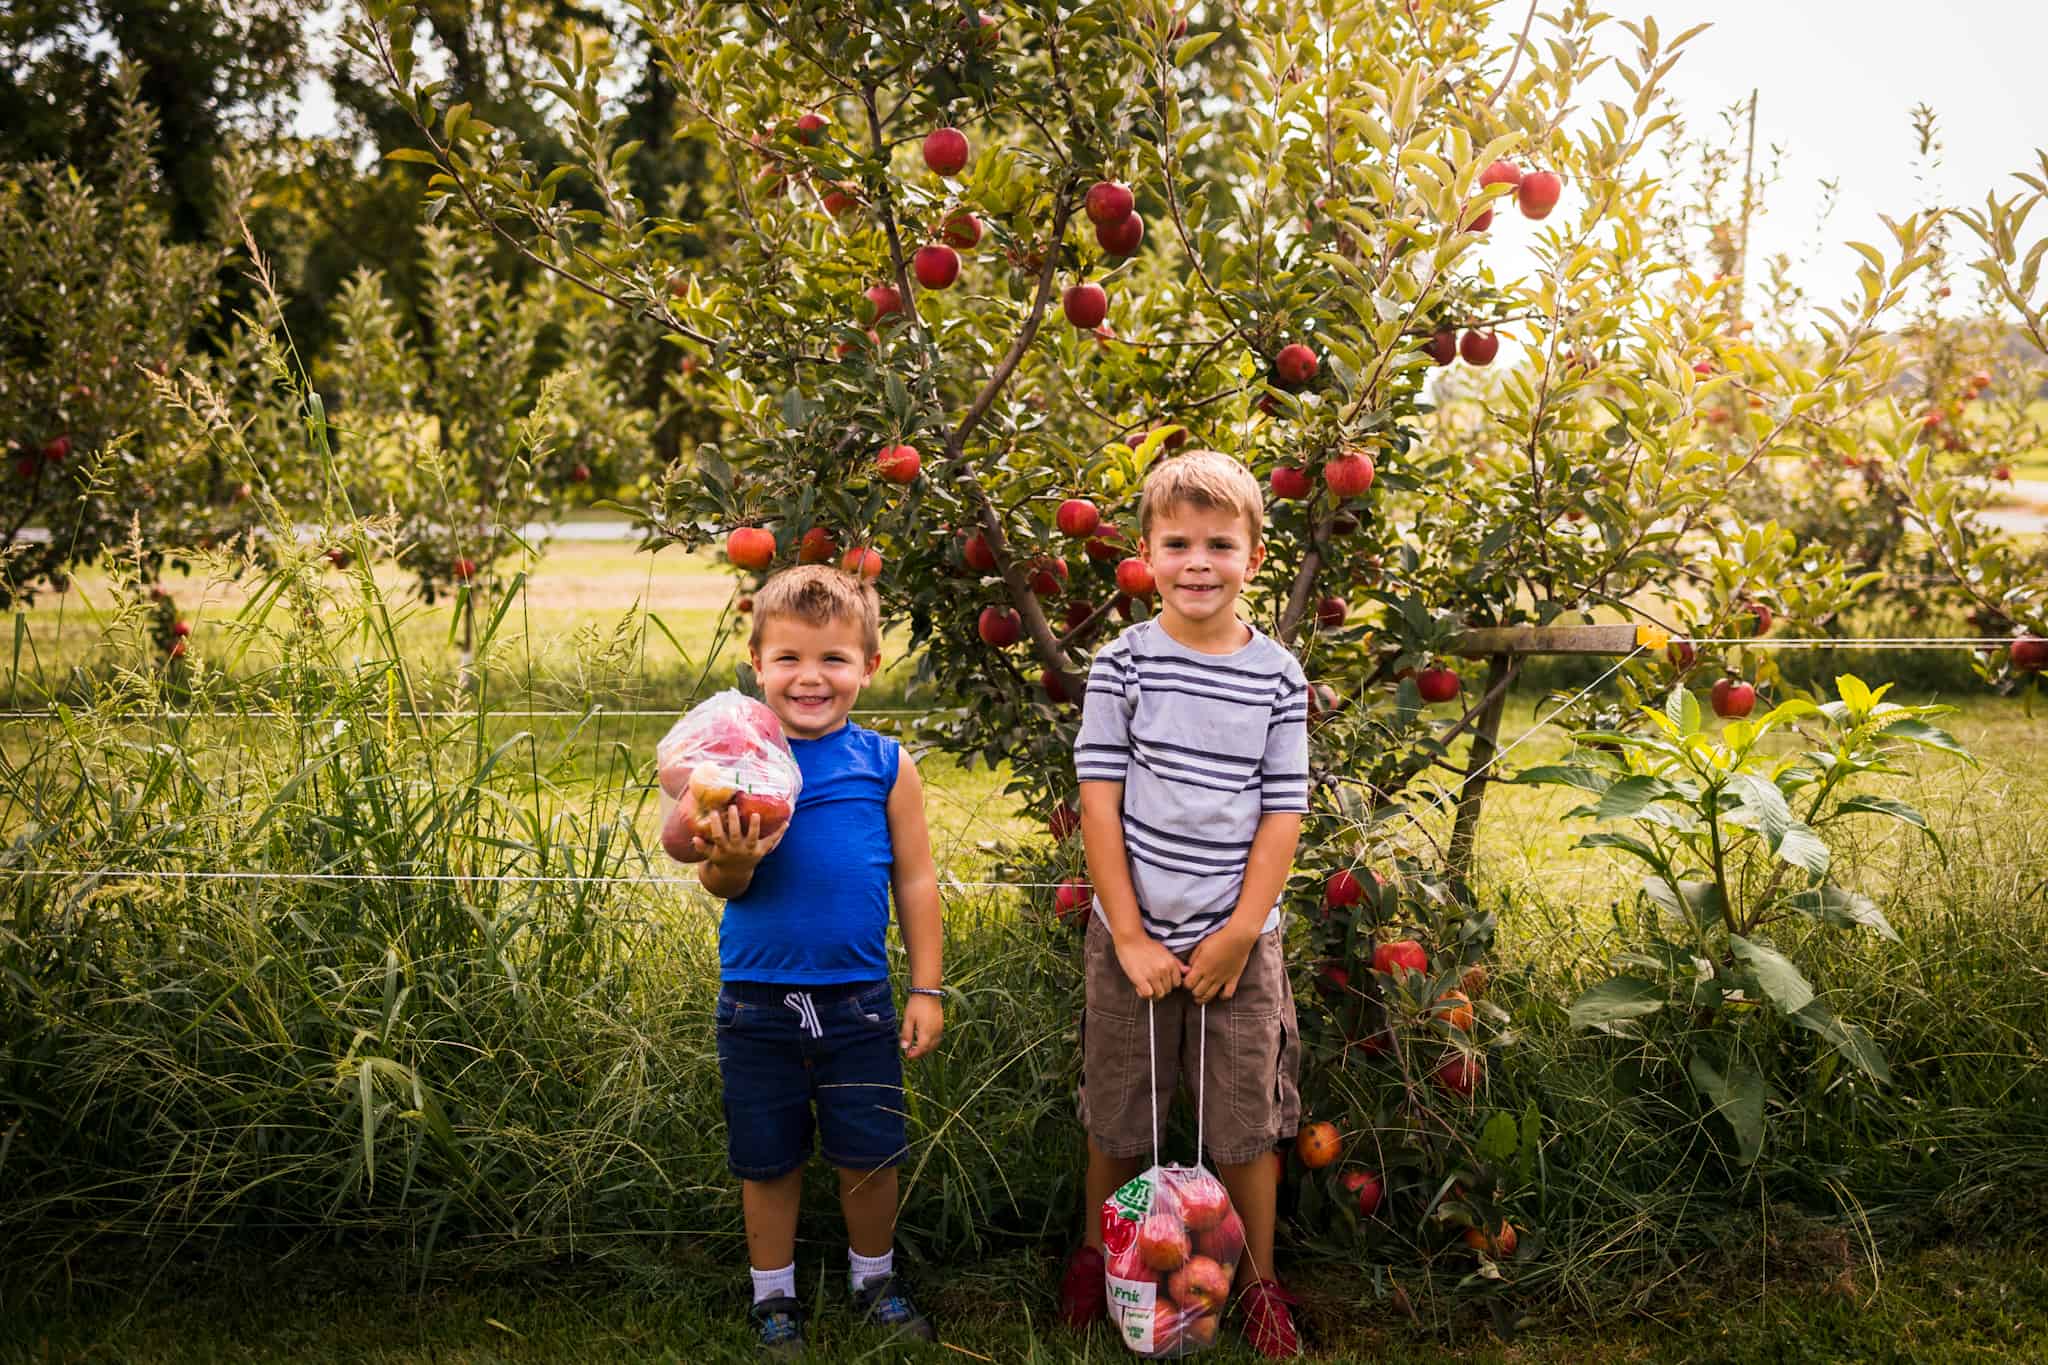 Two boys with bags of apples in front of an apple tree